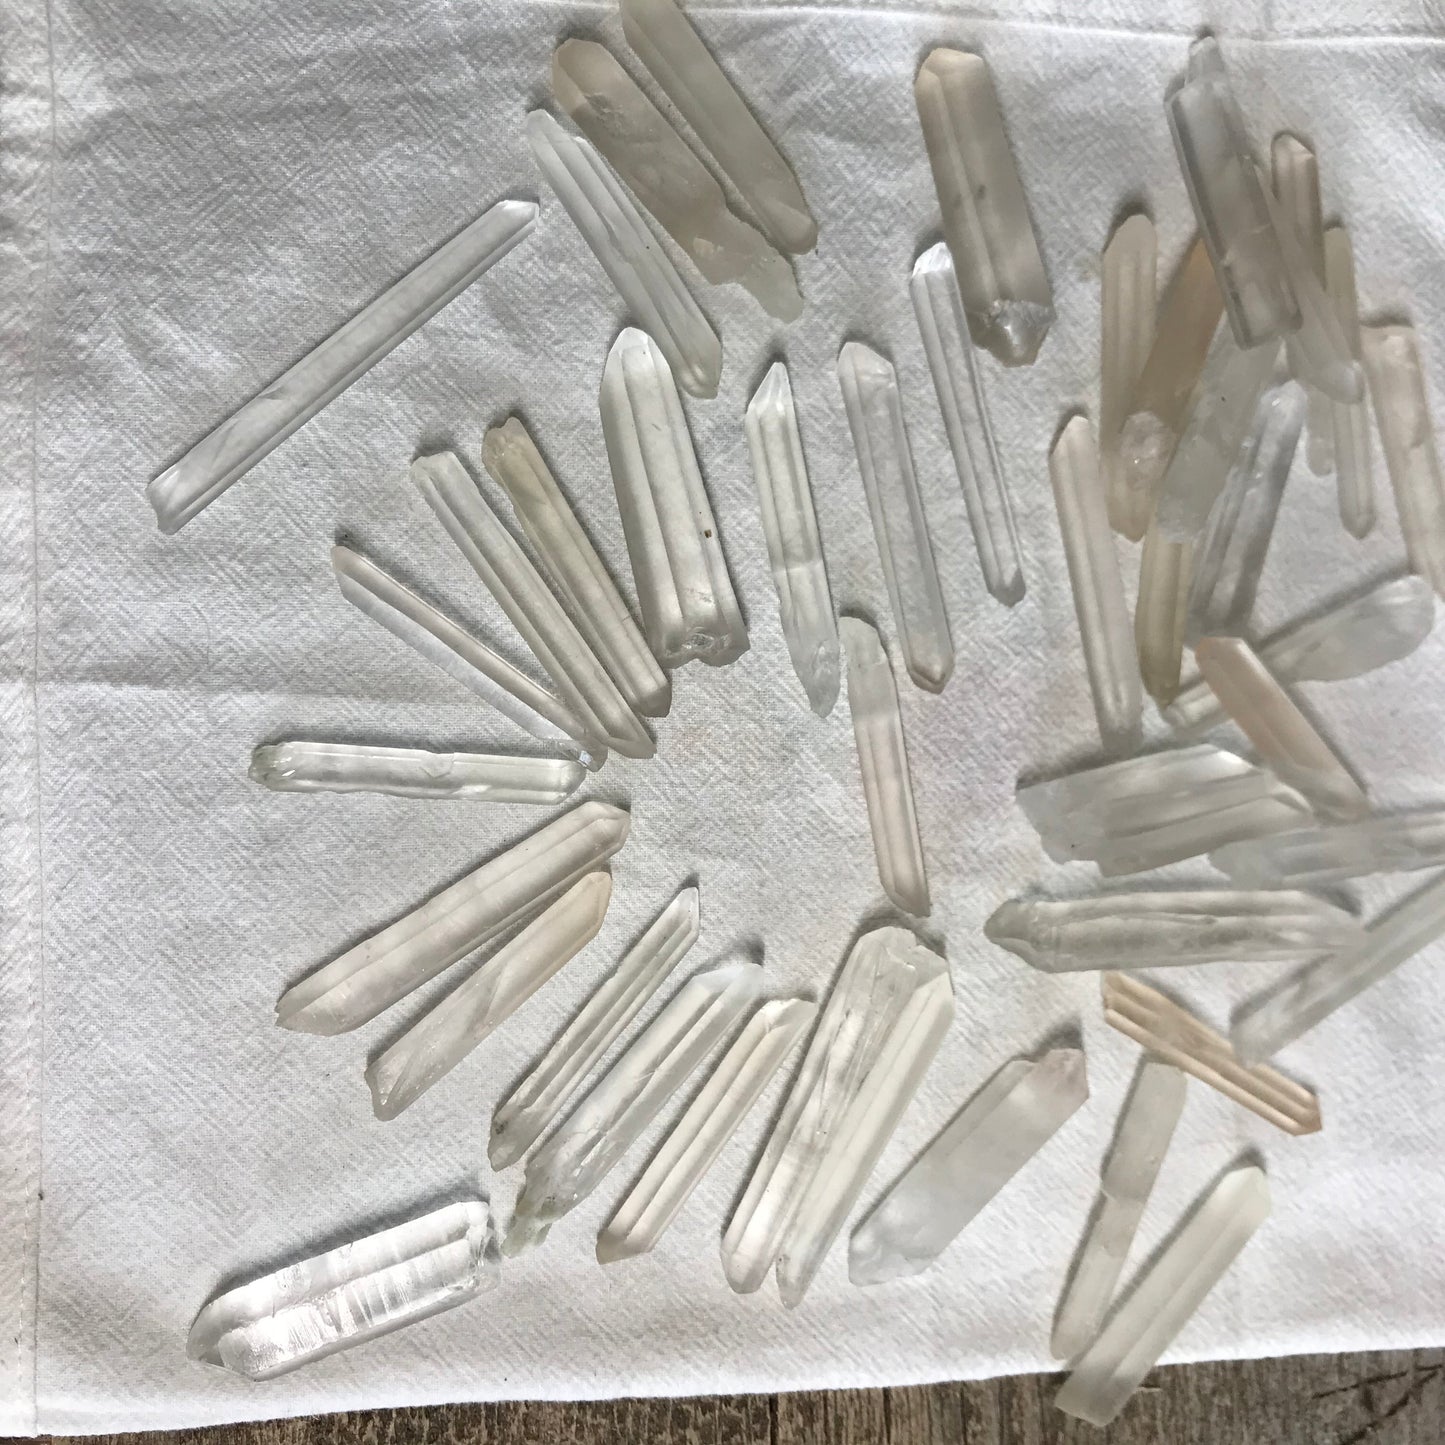 Quartz Crystal, (Approx. 1 1/2 -2 1/2") One Natural Crystal, Quartz Rough, for Crystal Grid Making or Wire Wrapping 1283